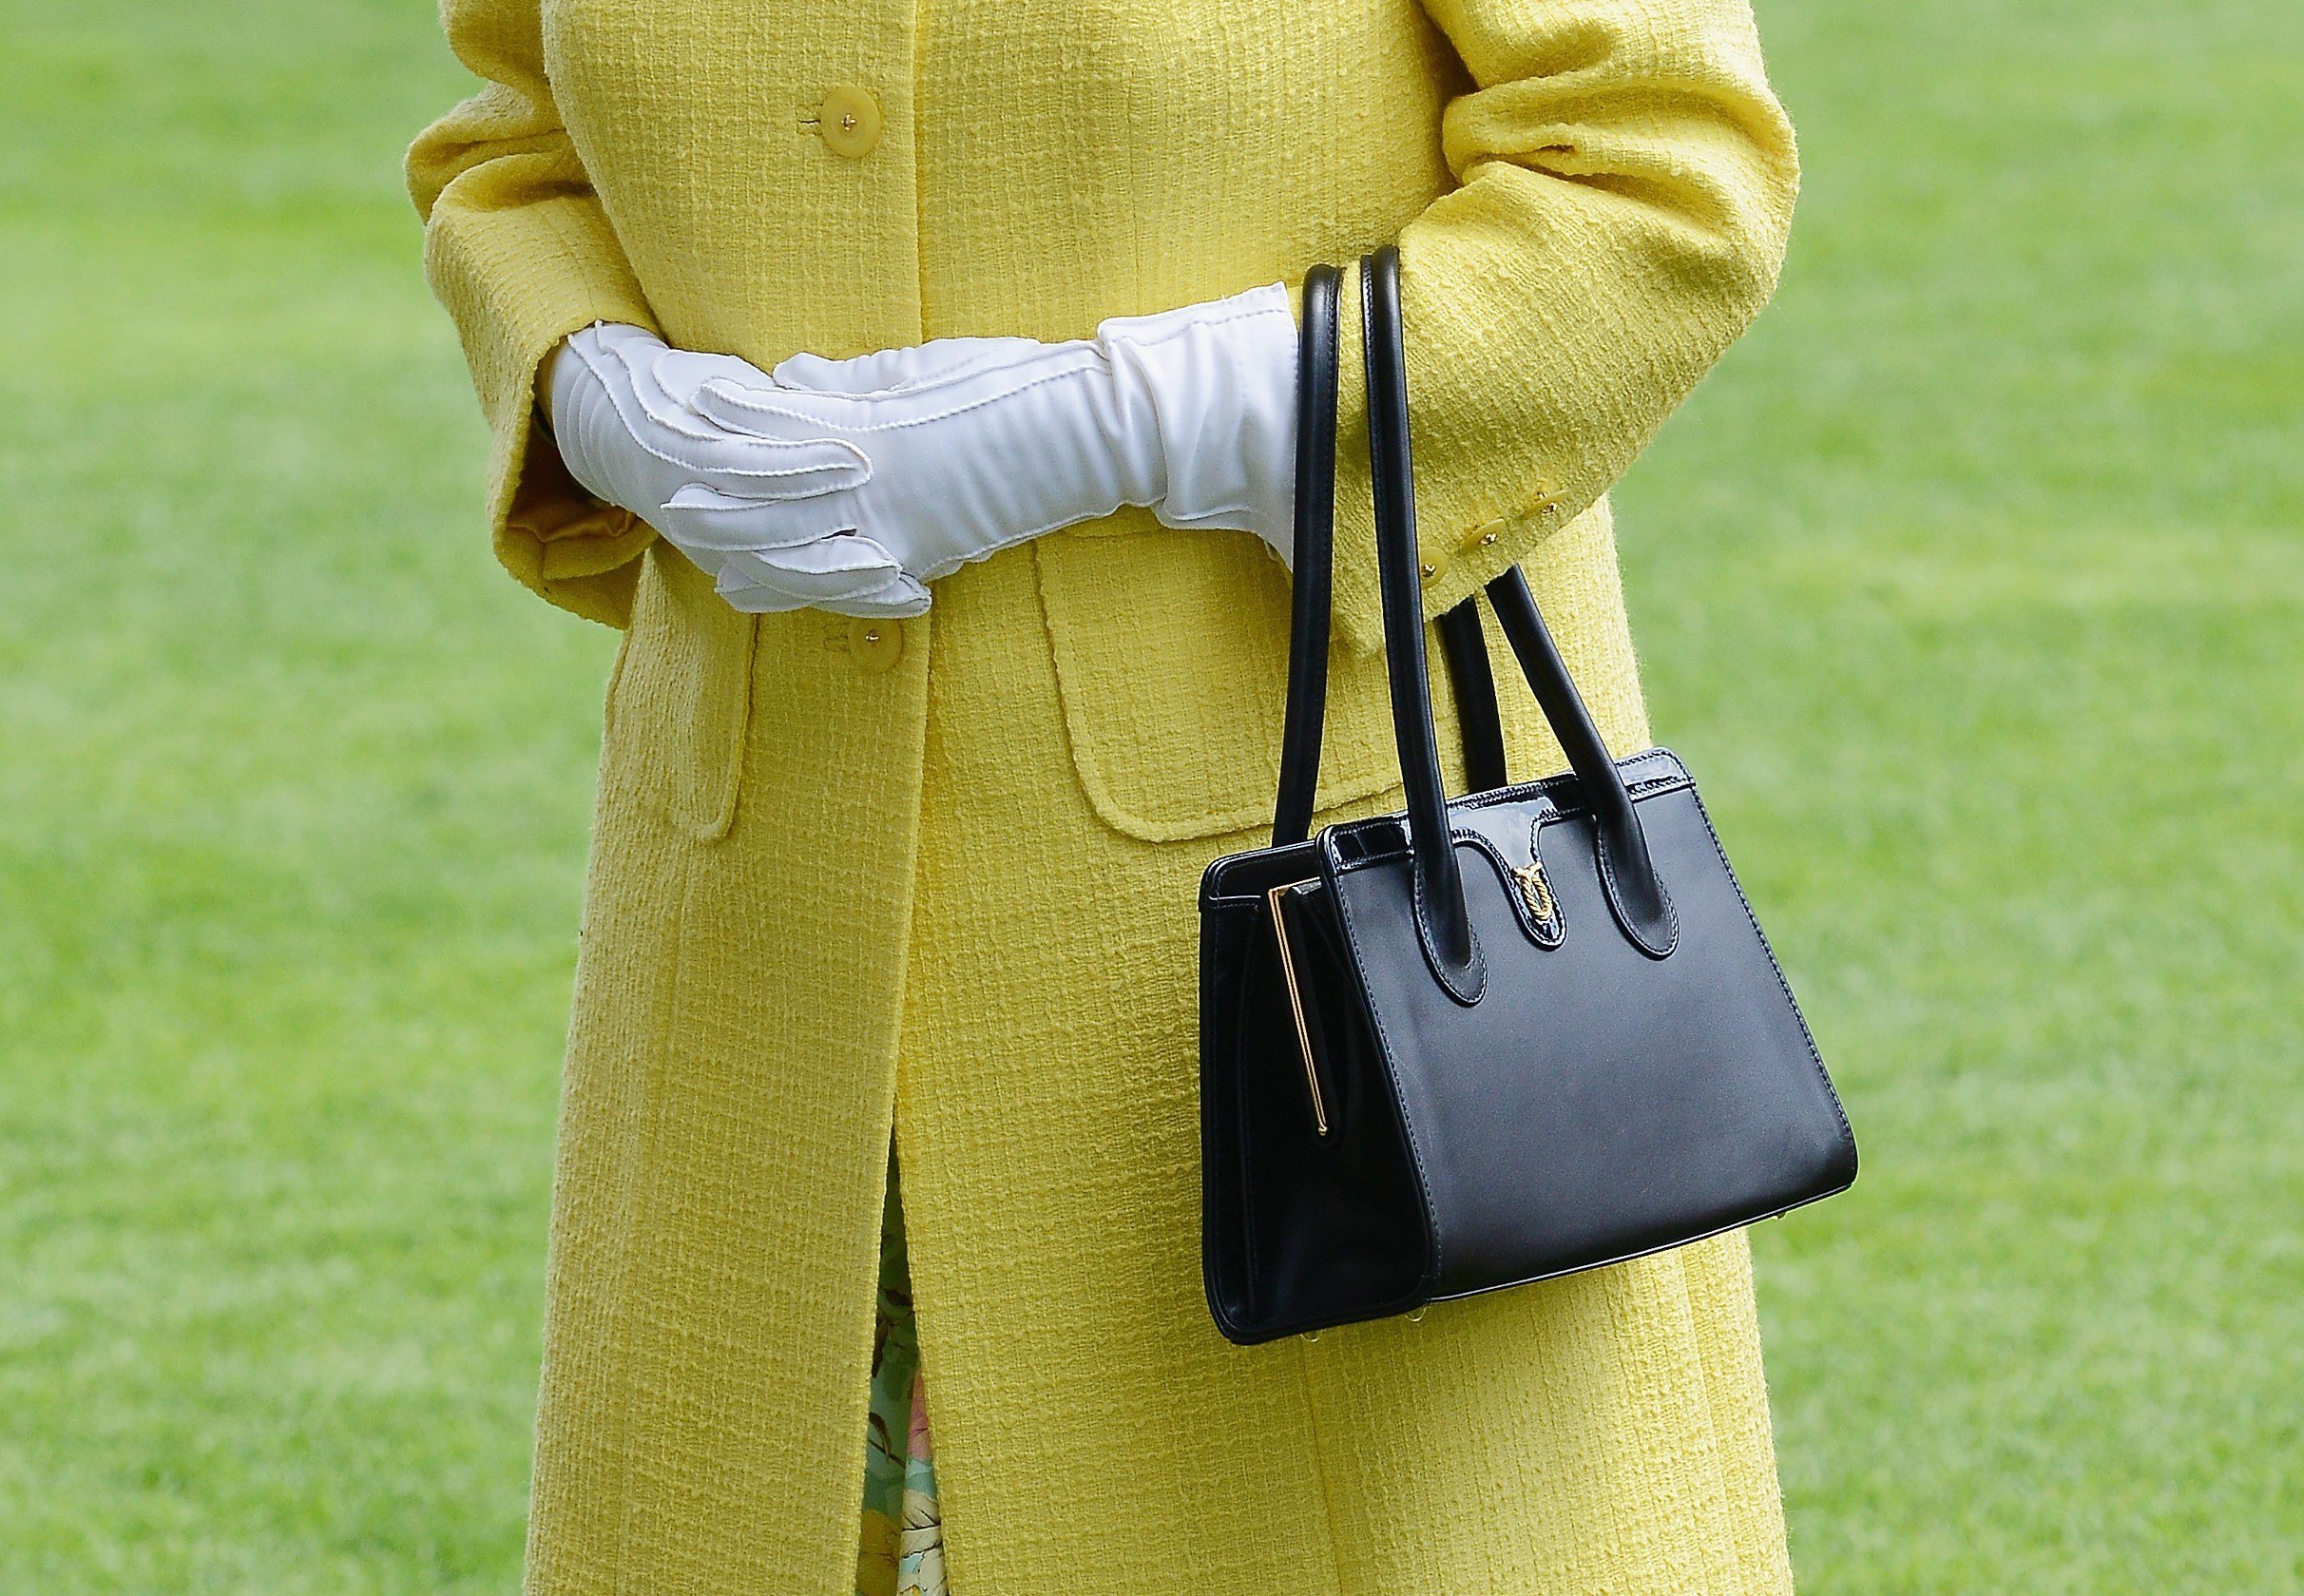 The Queen uses handbag signals to send secret messages to staff, Royal, News